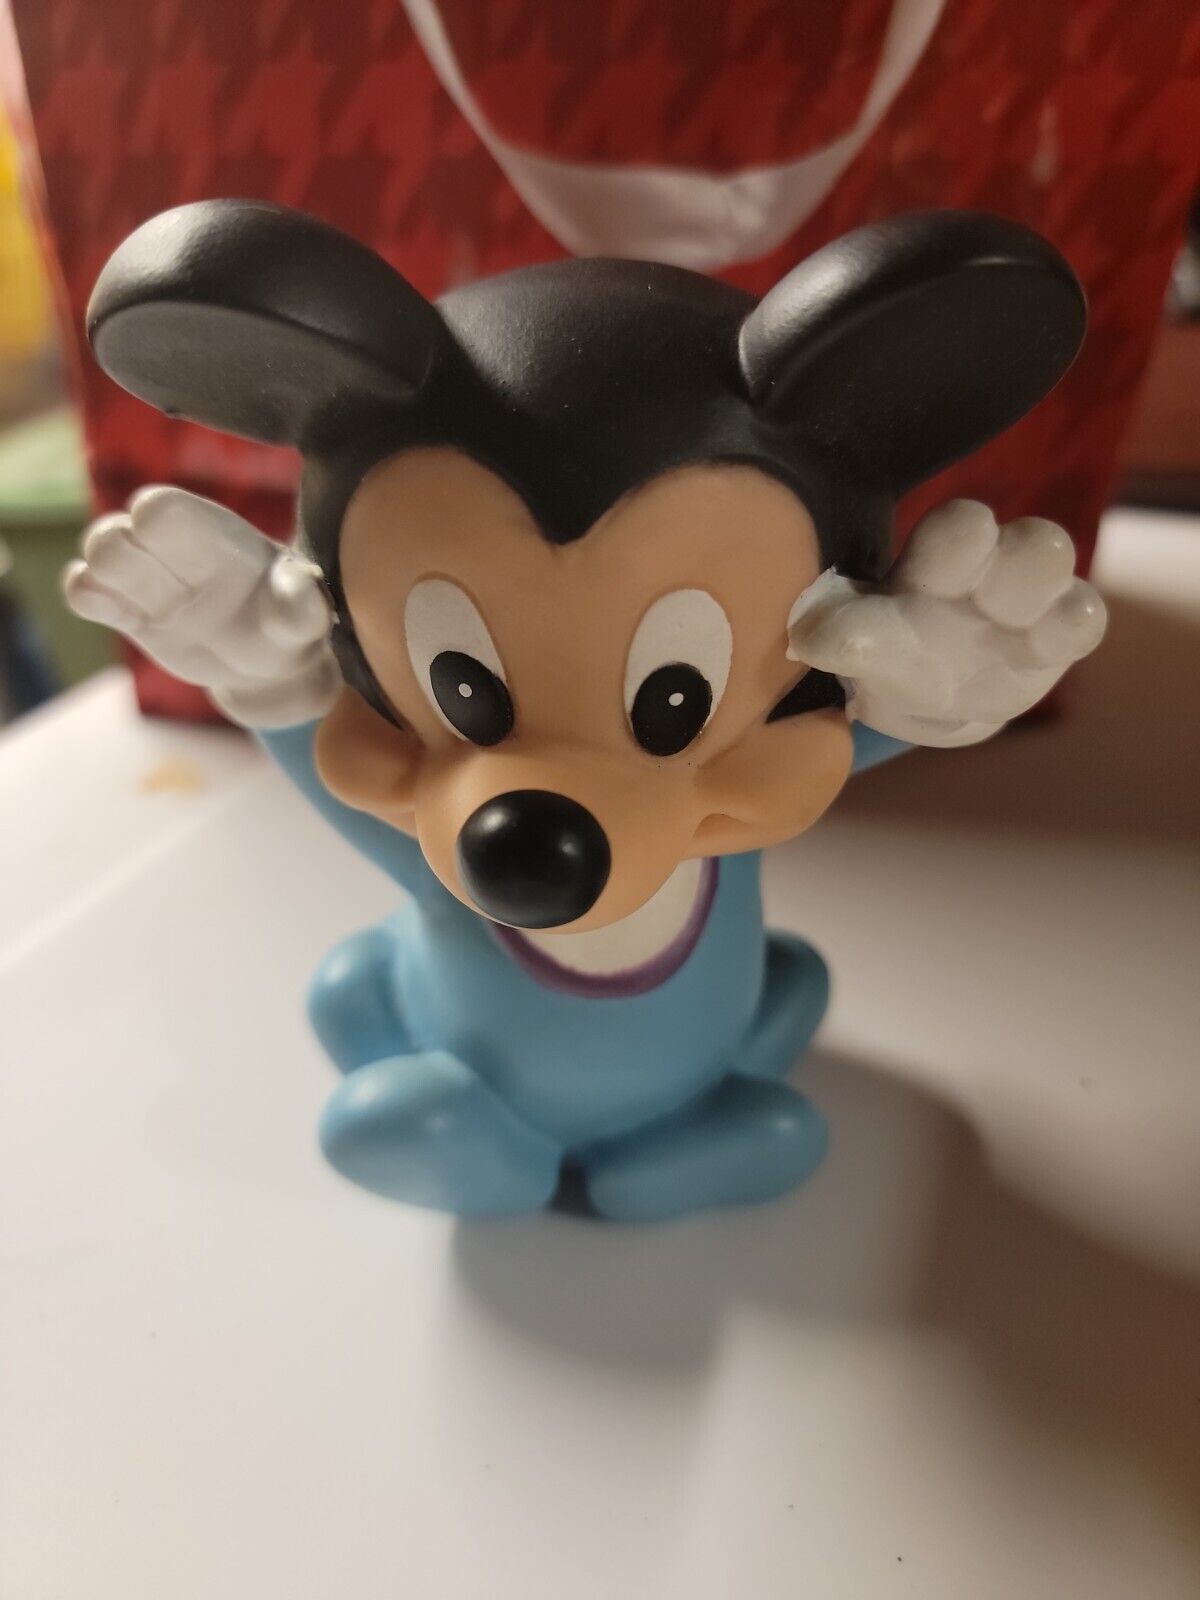 Vintage Arco Disney Baby Mickey Mouse Squeak Rubber Vinyl Toy - 6 inch